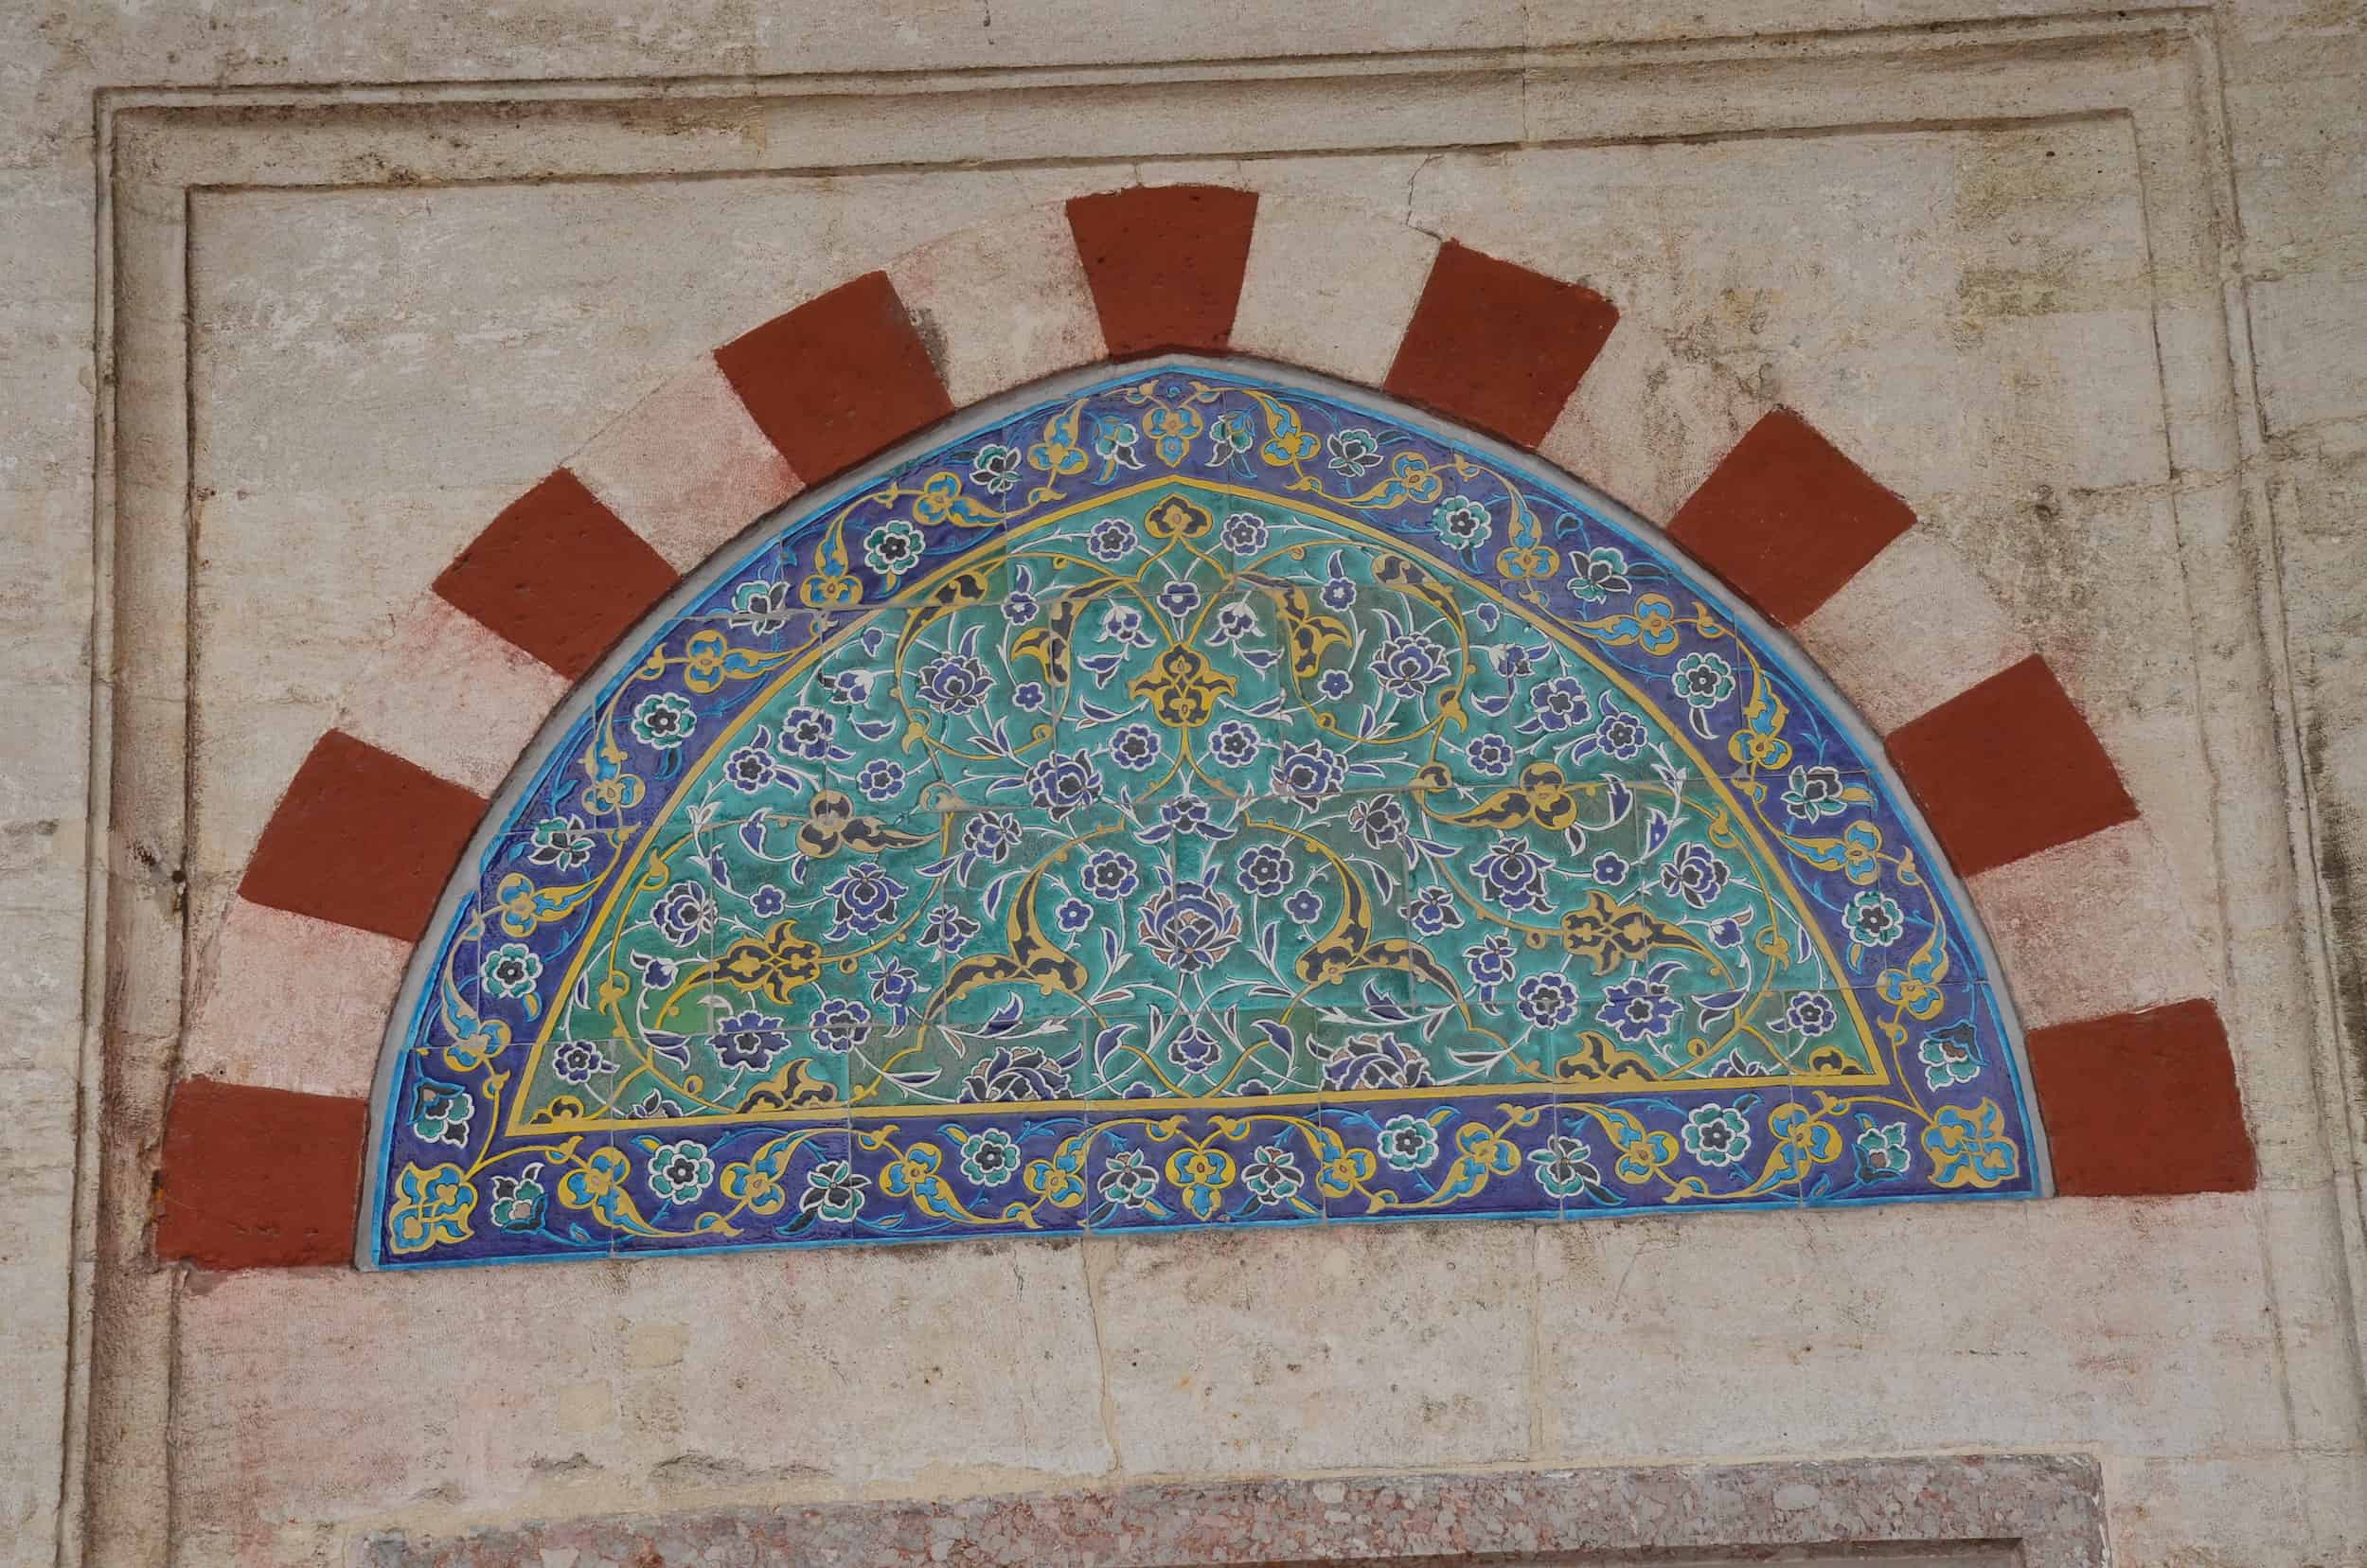 Tiles above a window in the courtyard